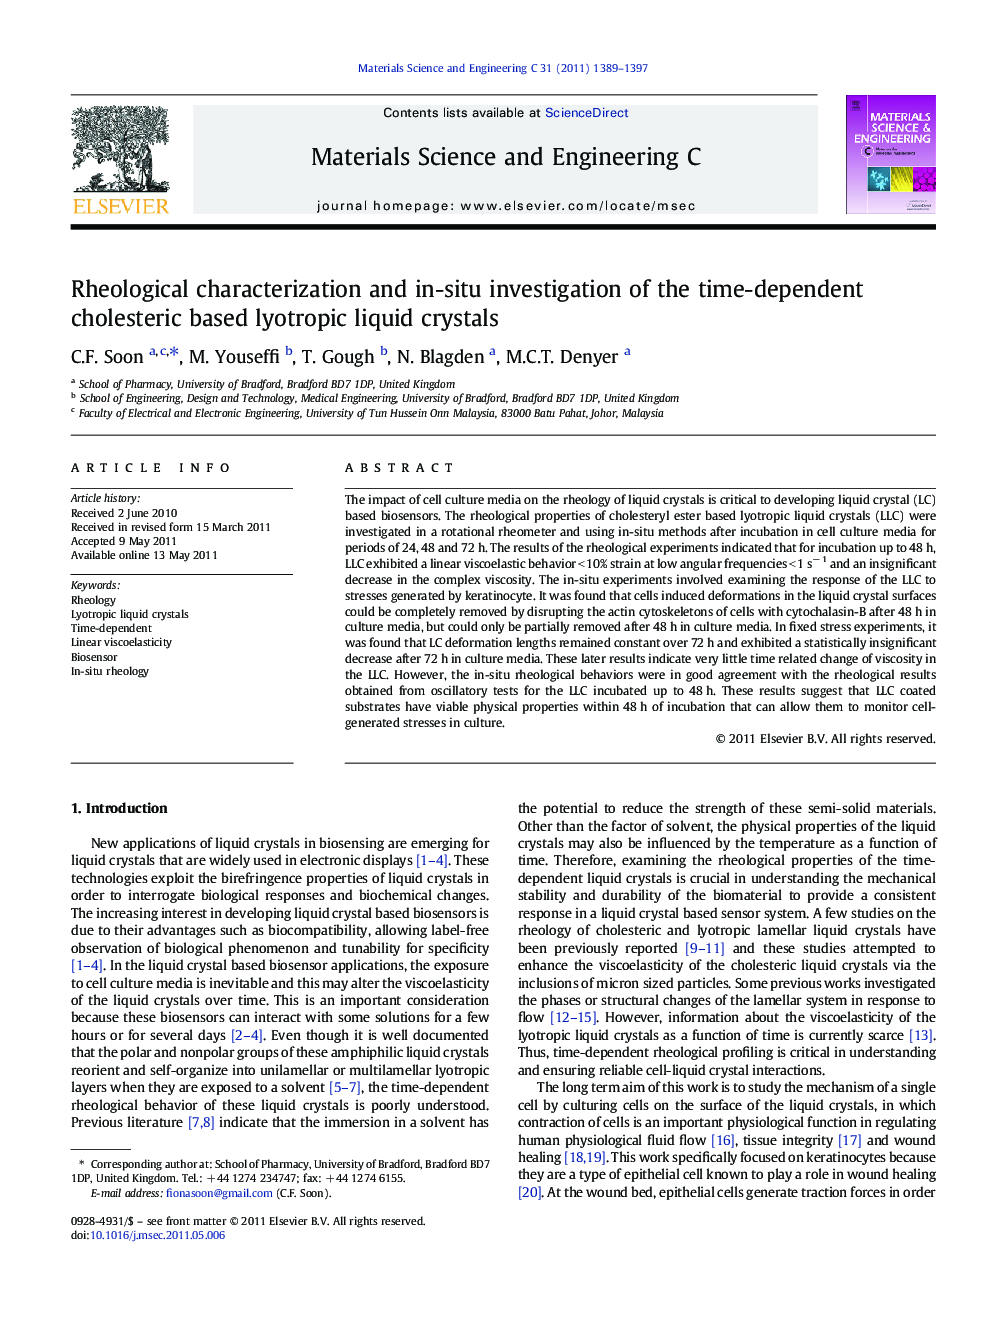 Rheological characterization and in-situ investigation of the time-dependent cholesteric based lyotropic liquid crystals